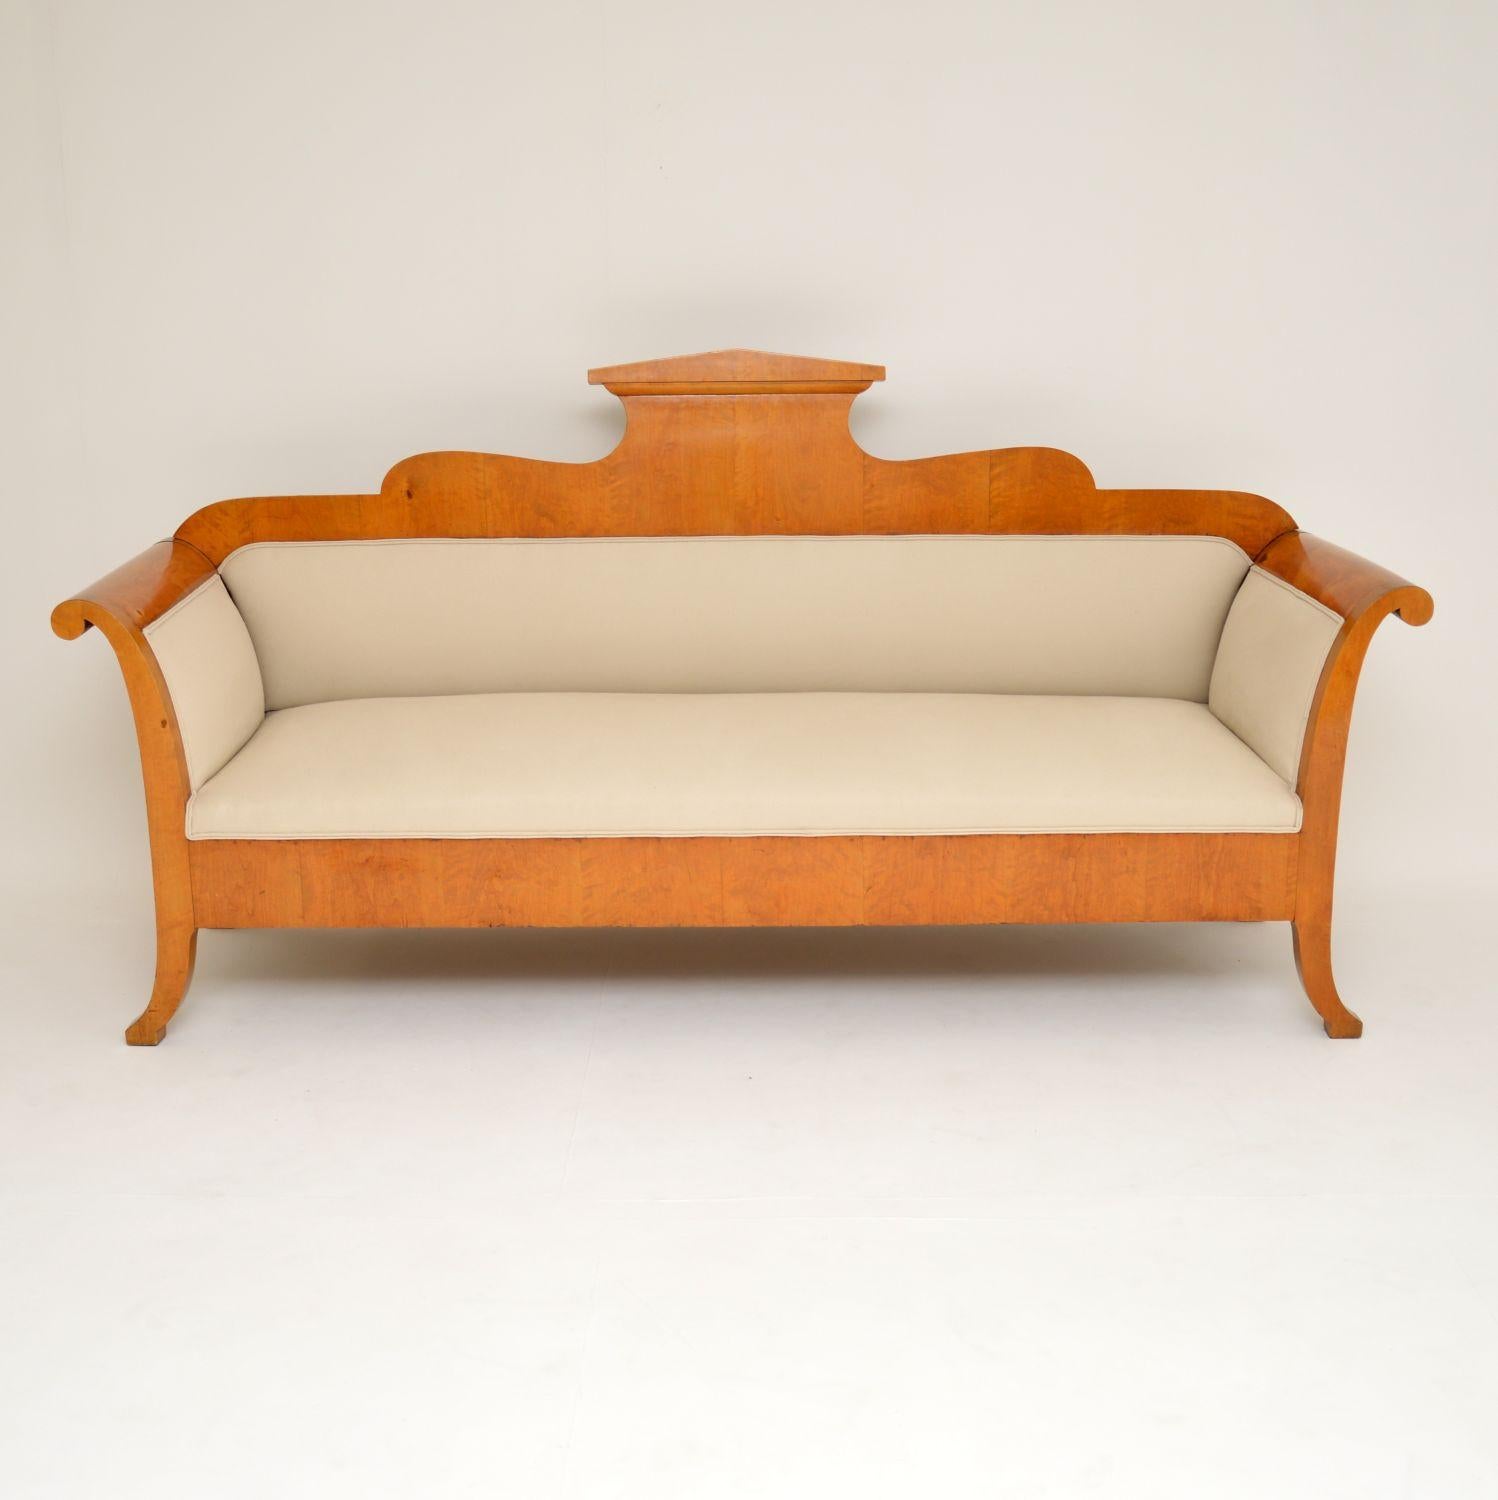 Large impressive antique Satin Birch Biedermeier sofa, which has just been re-upholstered in our regular natural cotton fabric. I would date it to around the 1850’s period & it’s in excellent condition throughout.
This sofa has just come over from